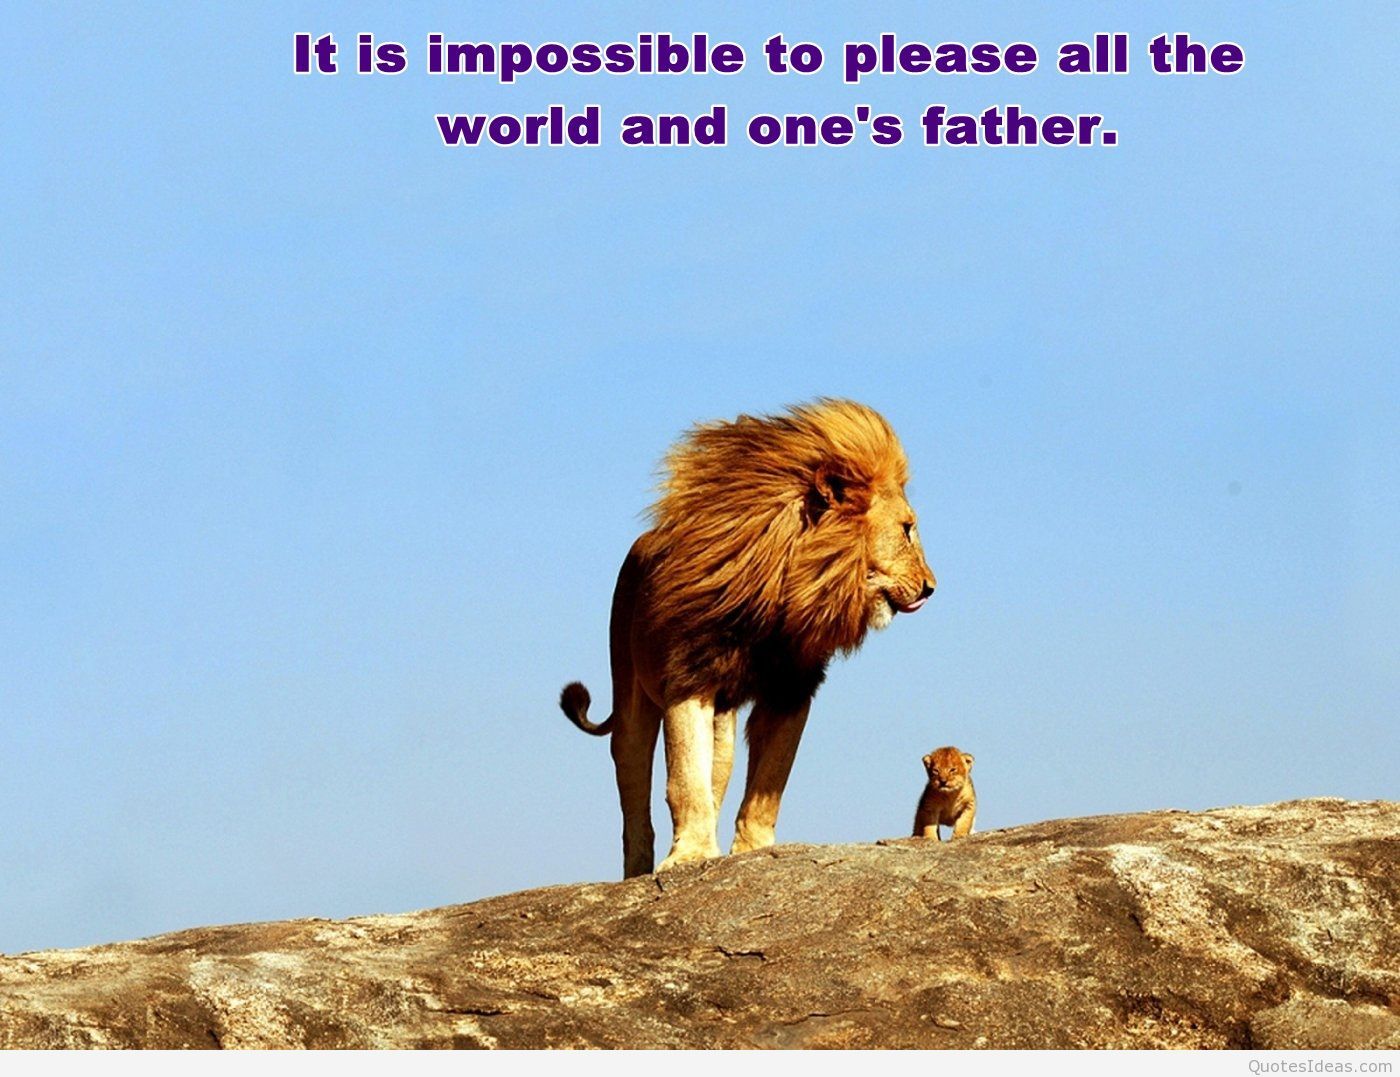 Awesome dad quote with lion wallpaper hd